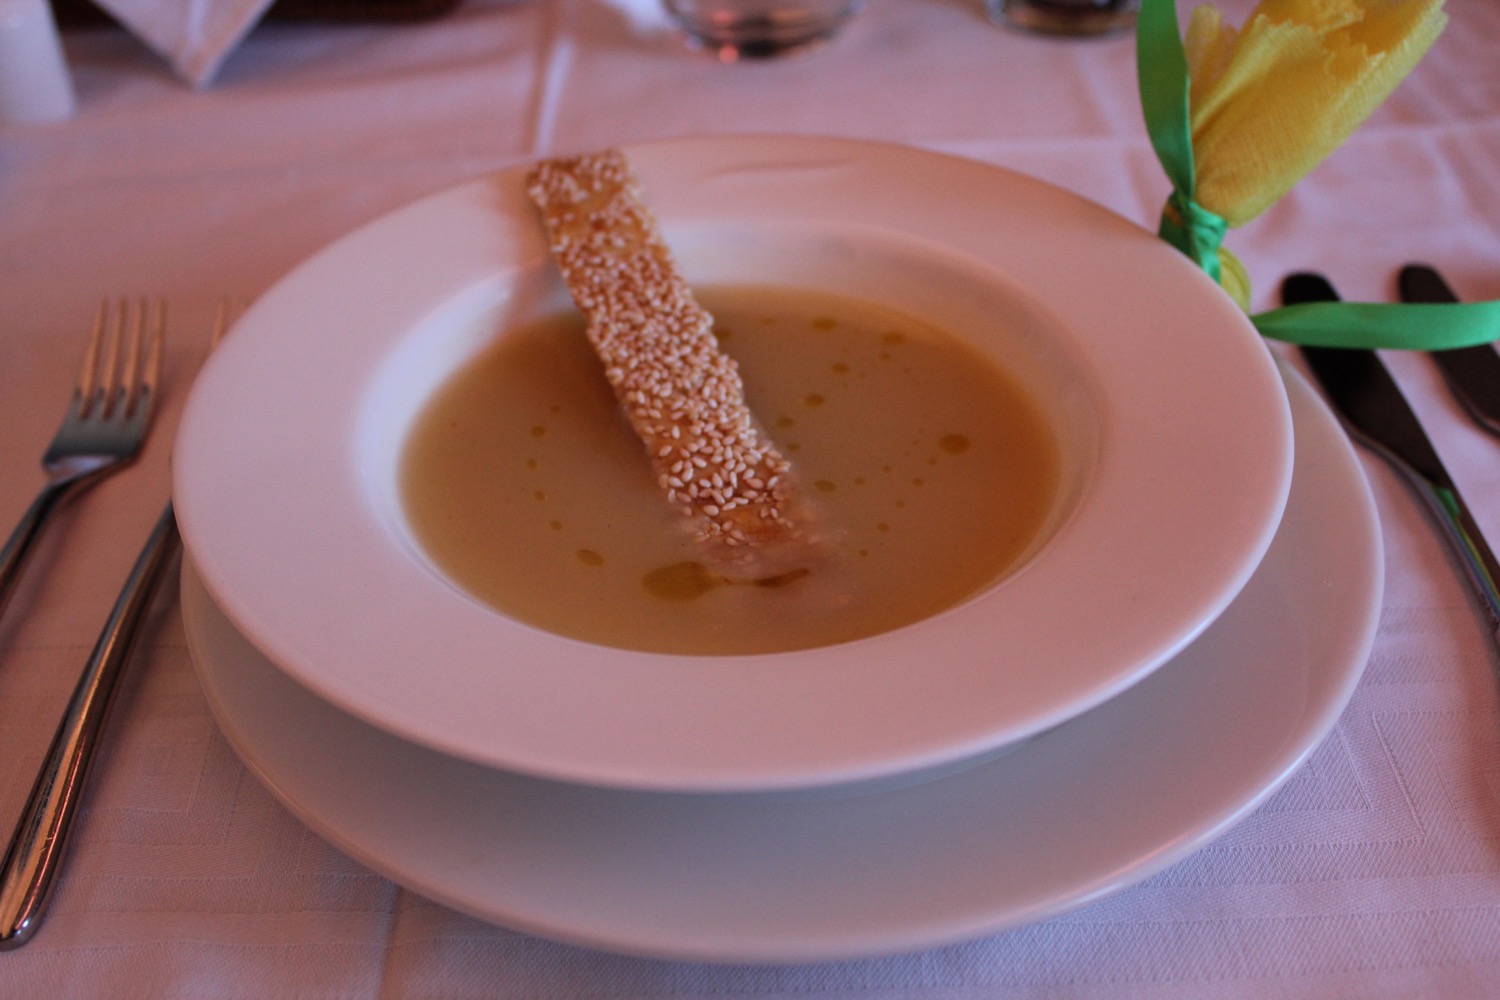 a plate of soup with a stick in it